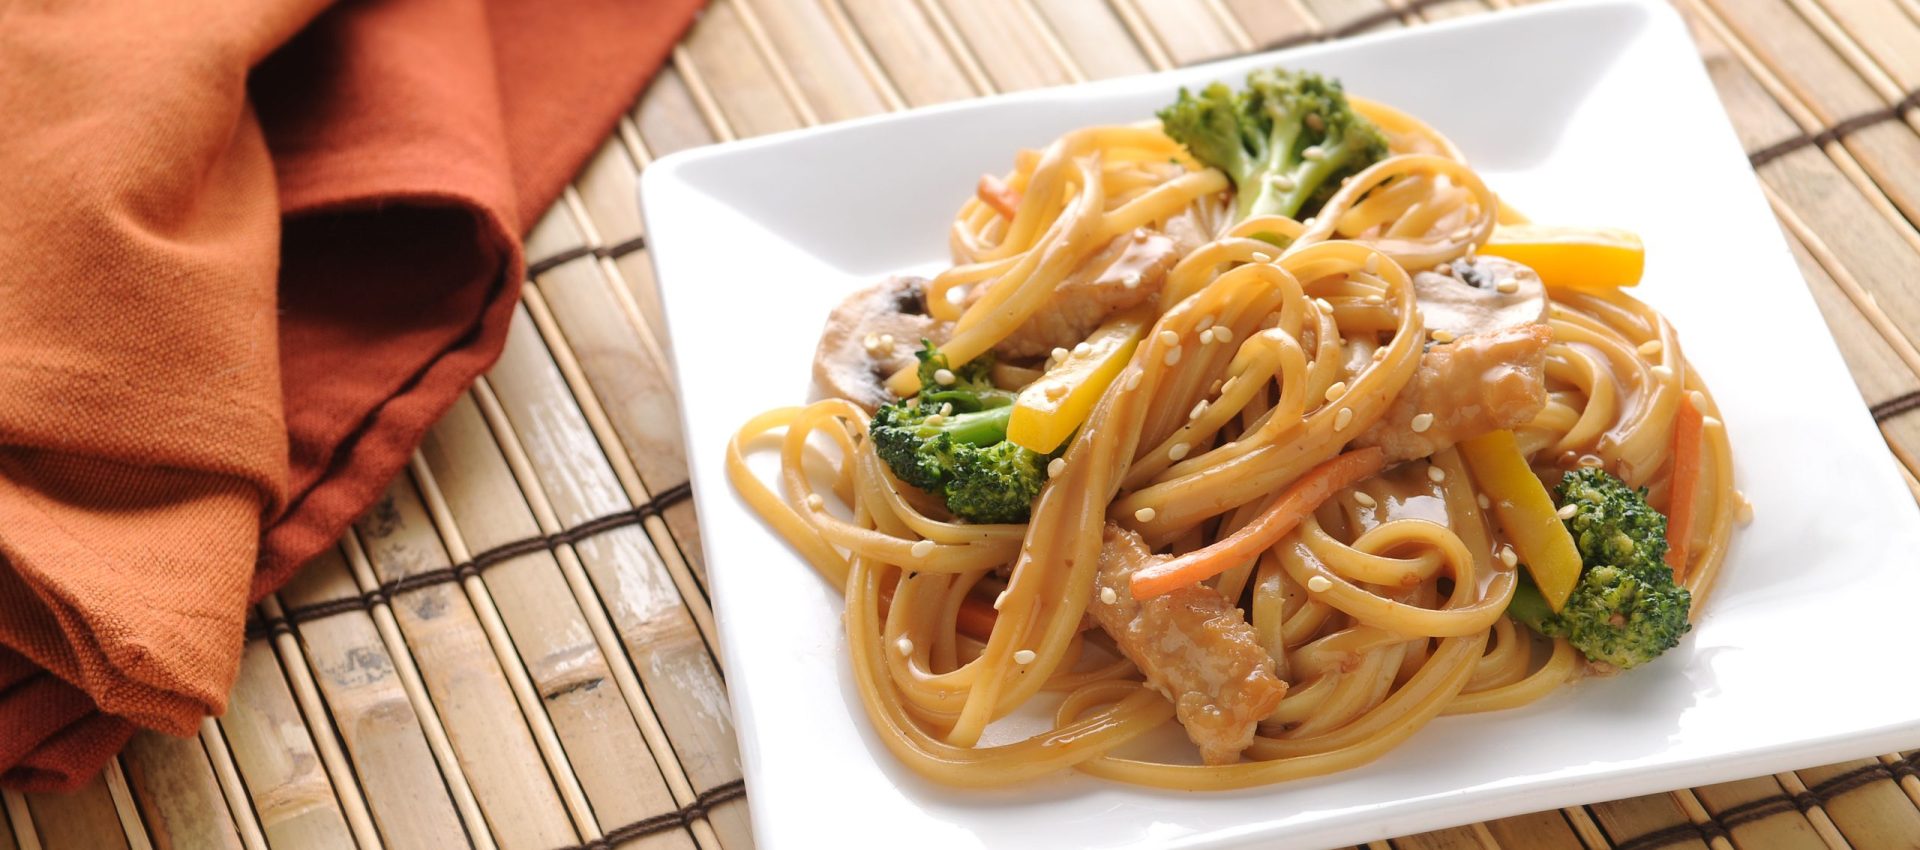 Linguine-with-Asian-Style-Pork-scaled-1920x850 Linguine with Asian-Style Pork